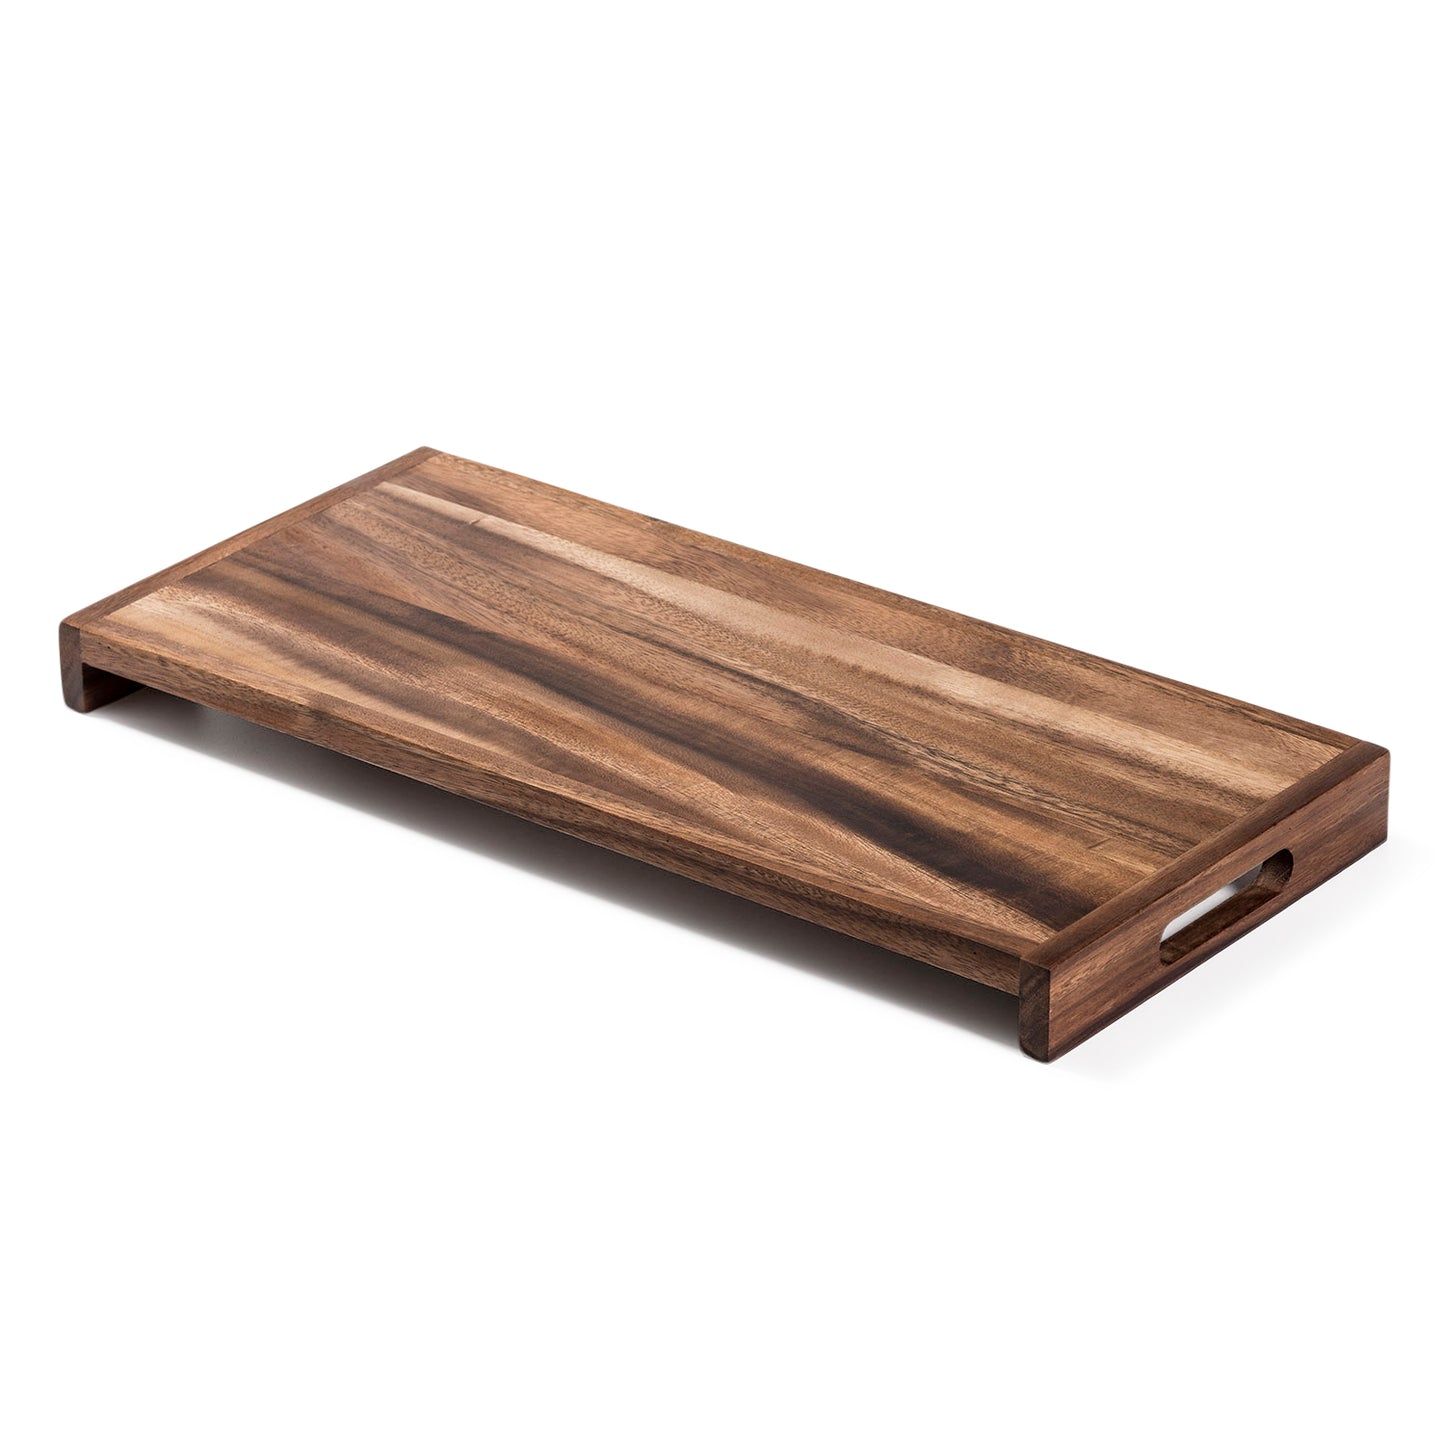 Serving Tray - solid bottom - Long